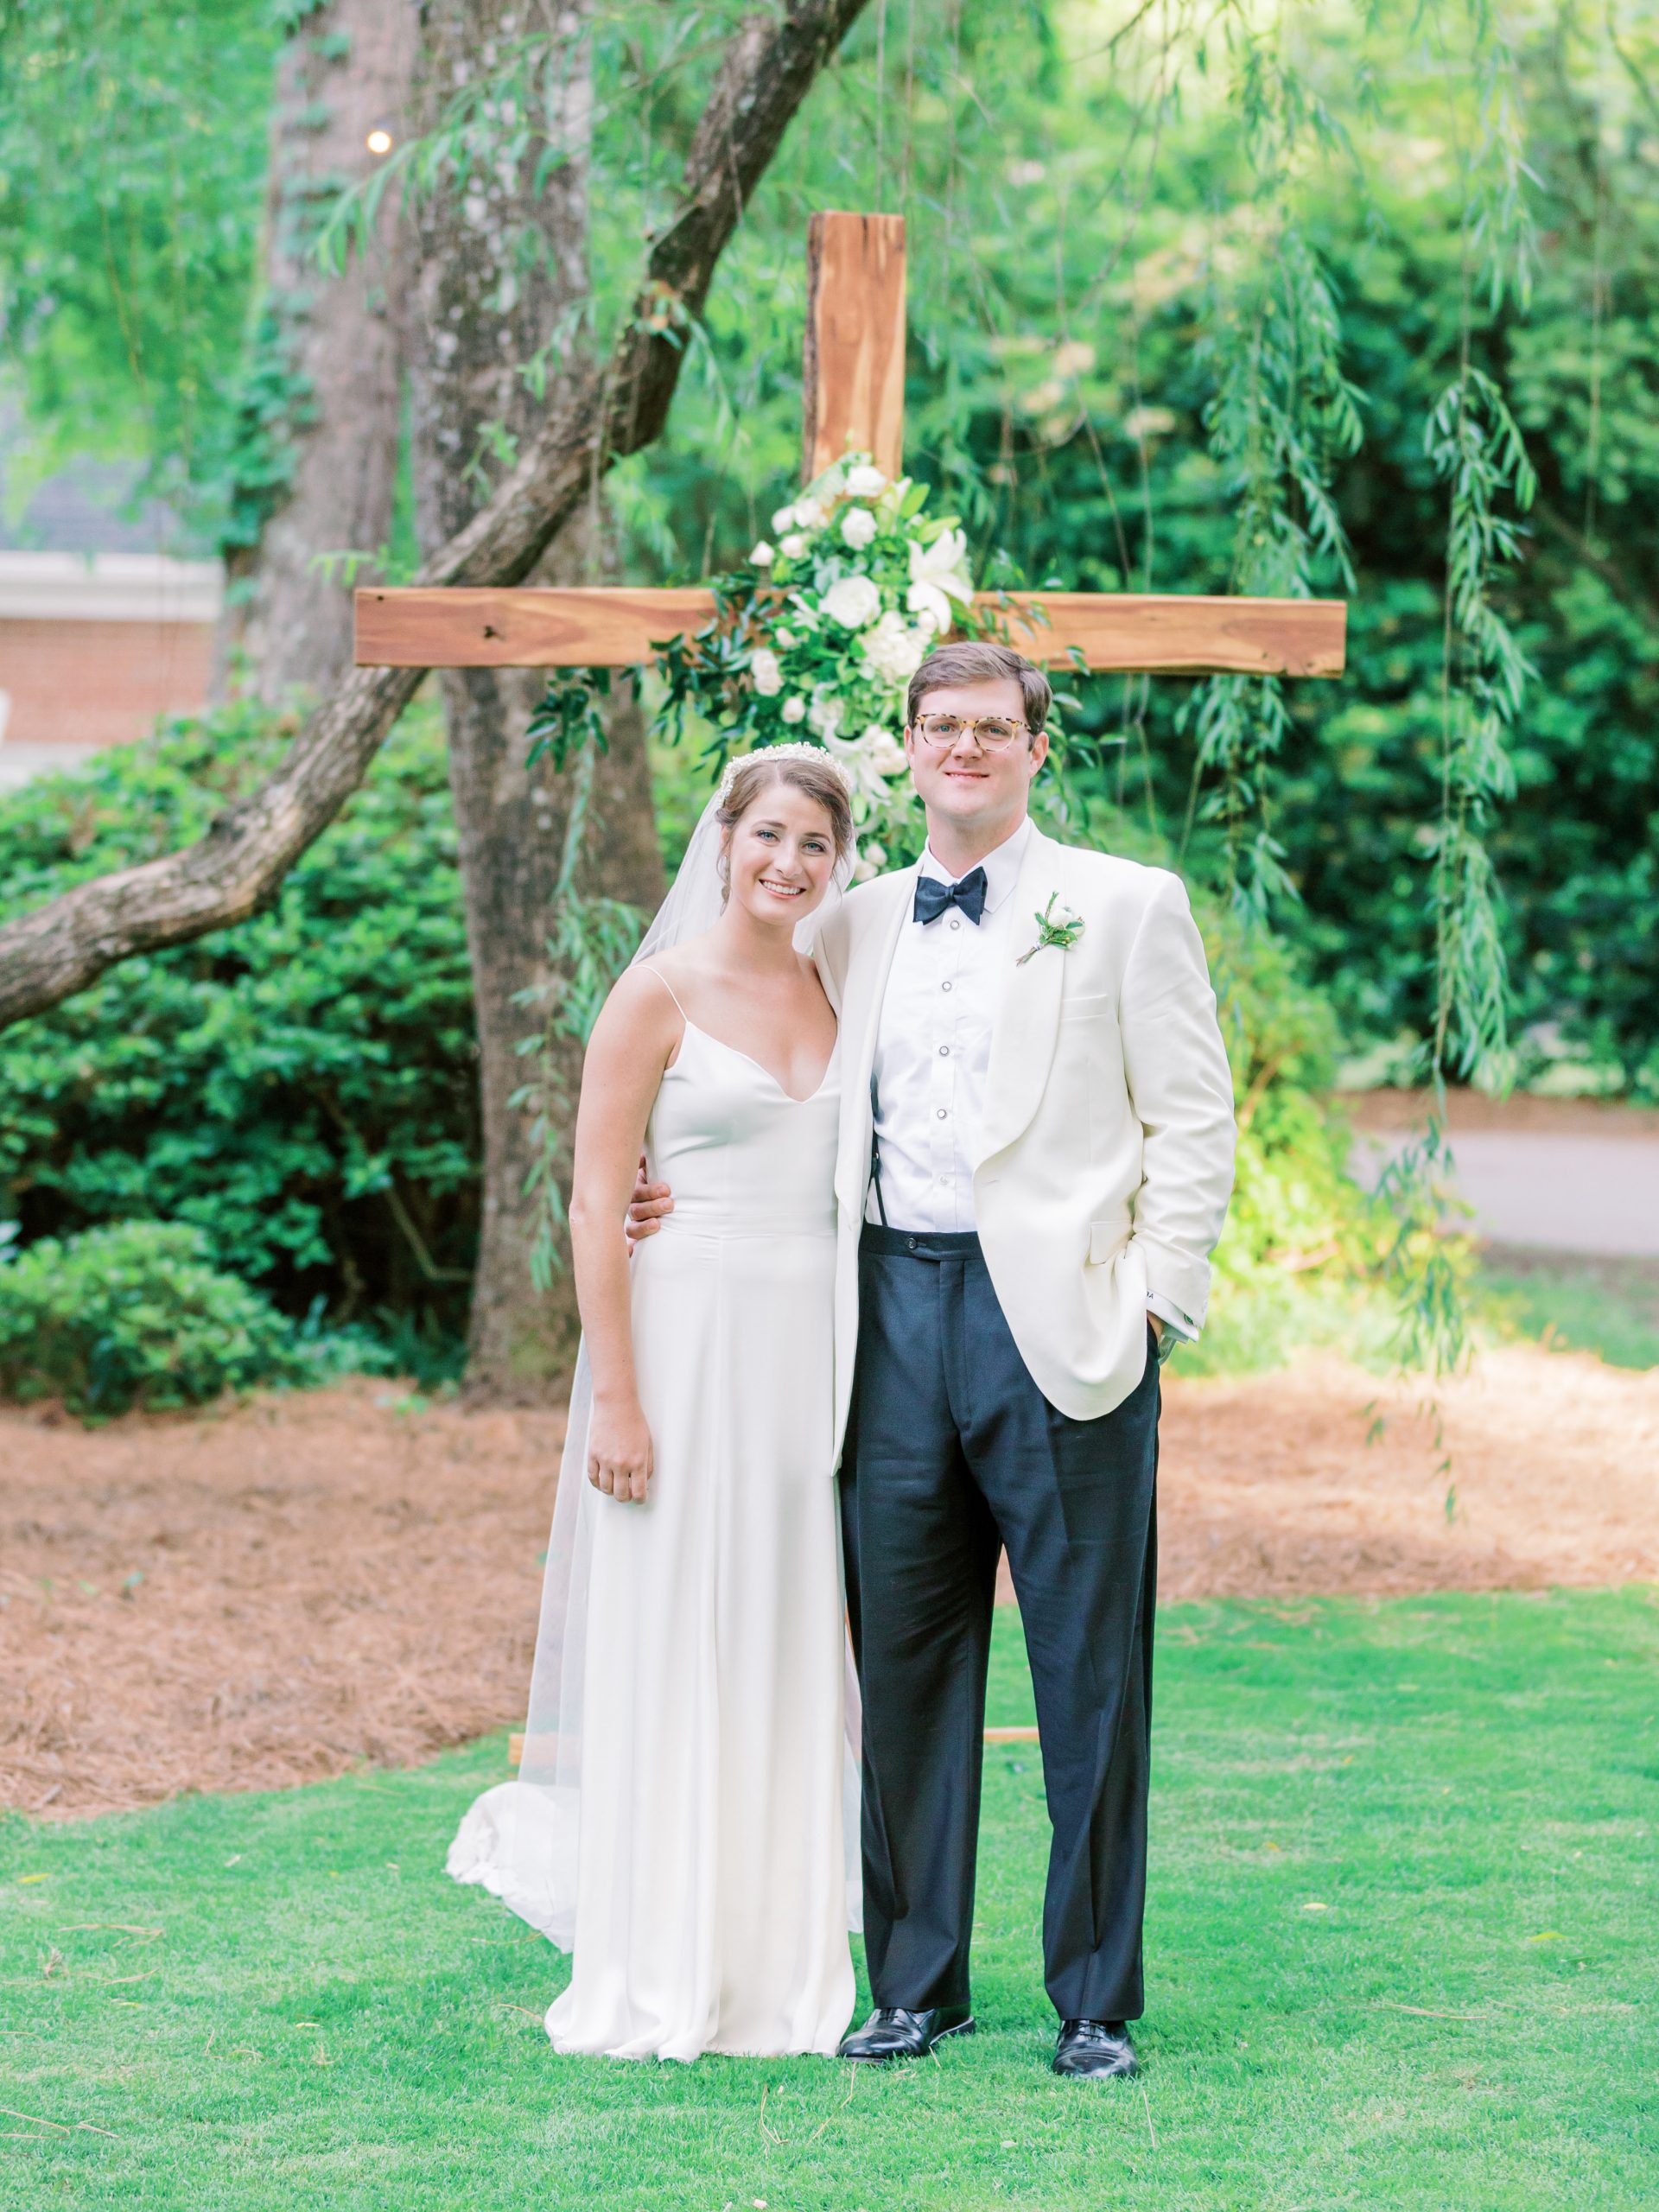 Mary Etta Castles and Edward Able enjoyed a backyard wedding on May 9 at the home of the bride’s parents, Libby Lee and Guy Castles. Special memories include a cross made by her brother, Guy, of timber from the family farm, the first dance on the patio, and the cake cutting next to her childhood playground. Photography by Karlyrichardson.com 
